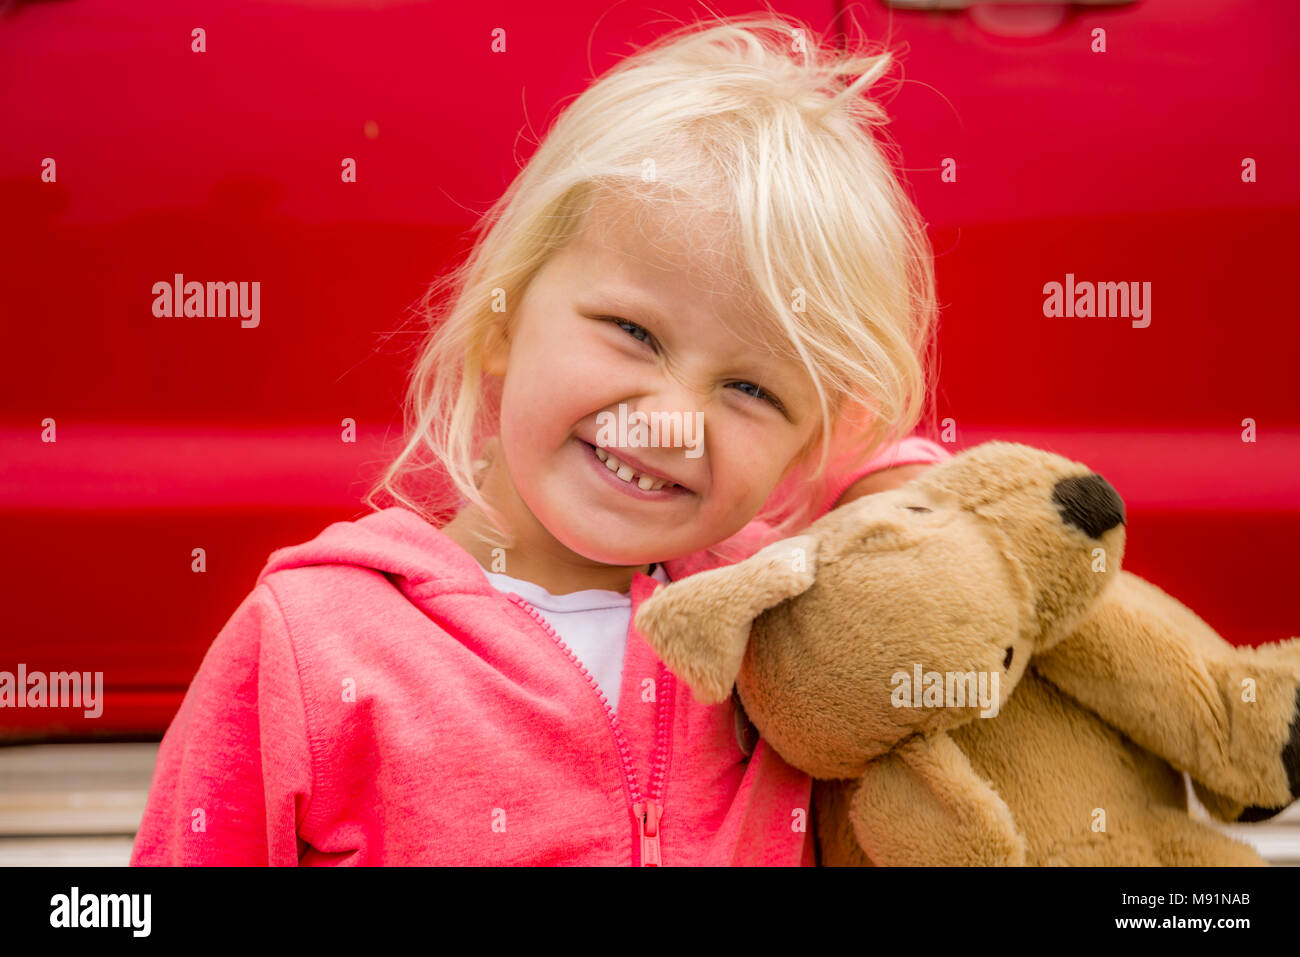 Portrait of a young girl, Iceland. Stock Photo